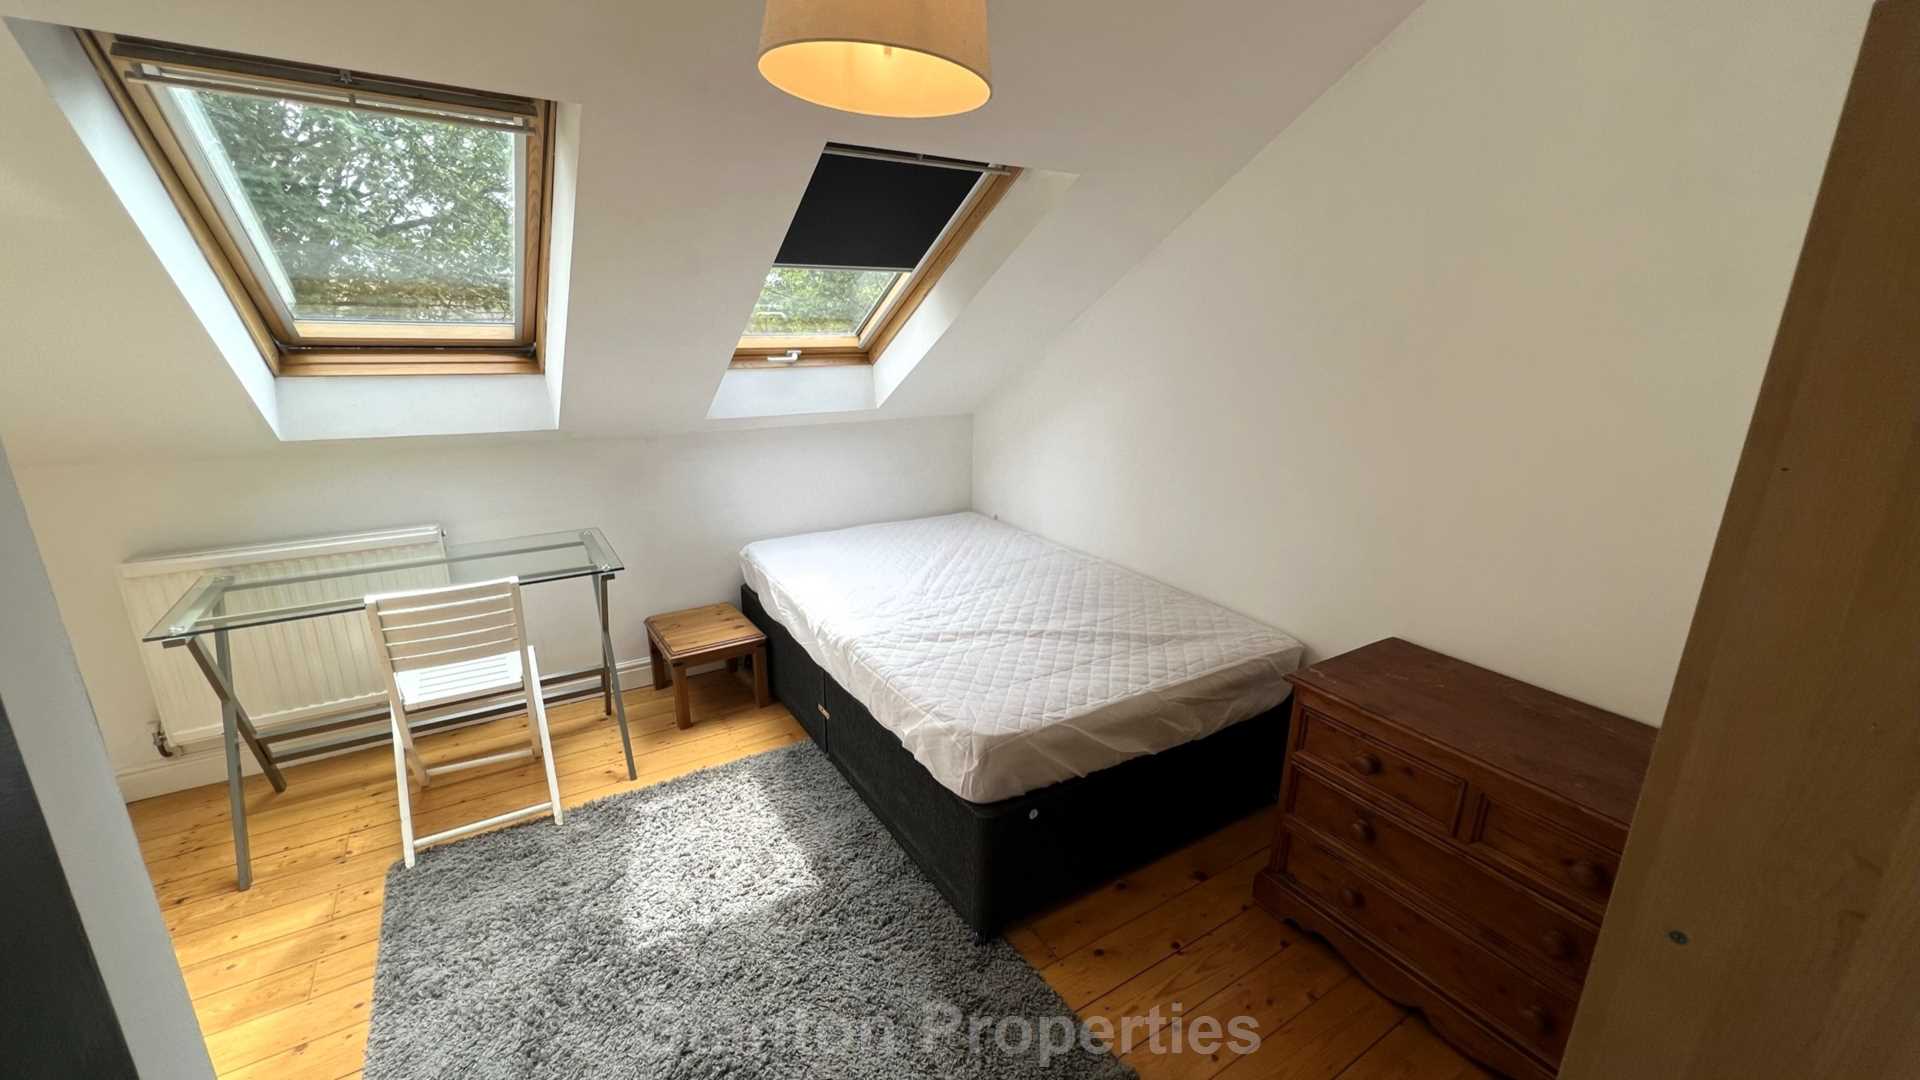 £145 pppw, Linden Grove, Fallowfield, Image 18